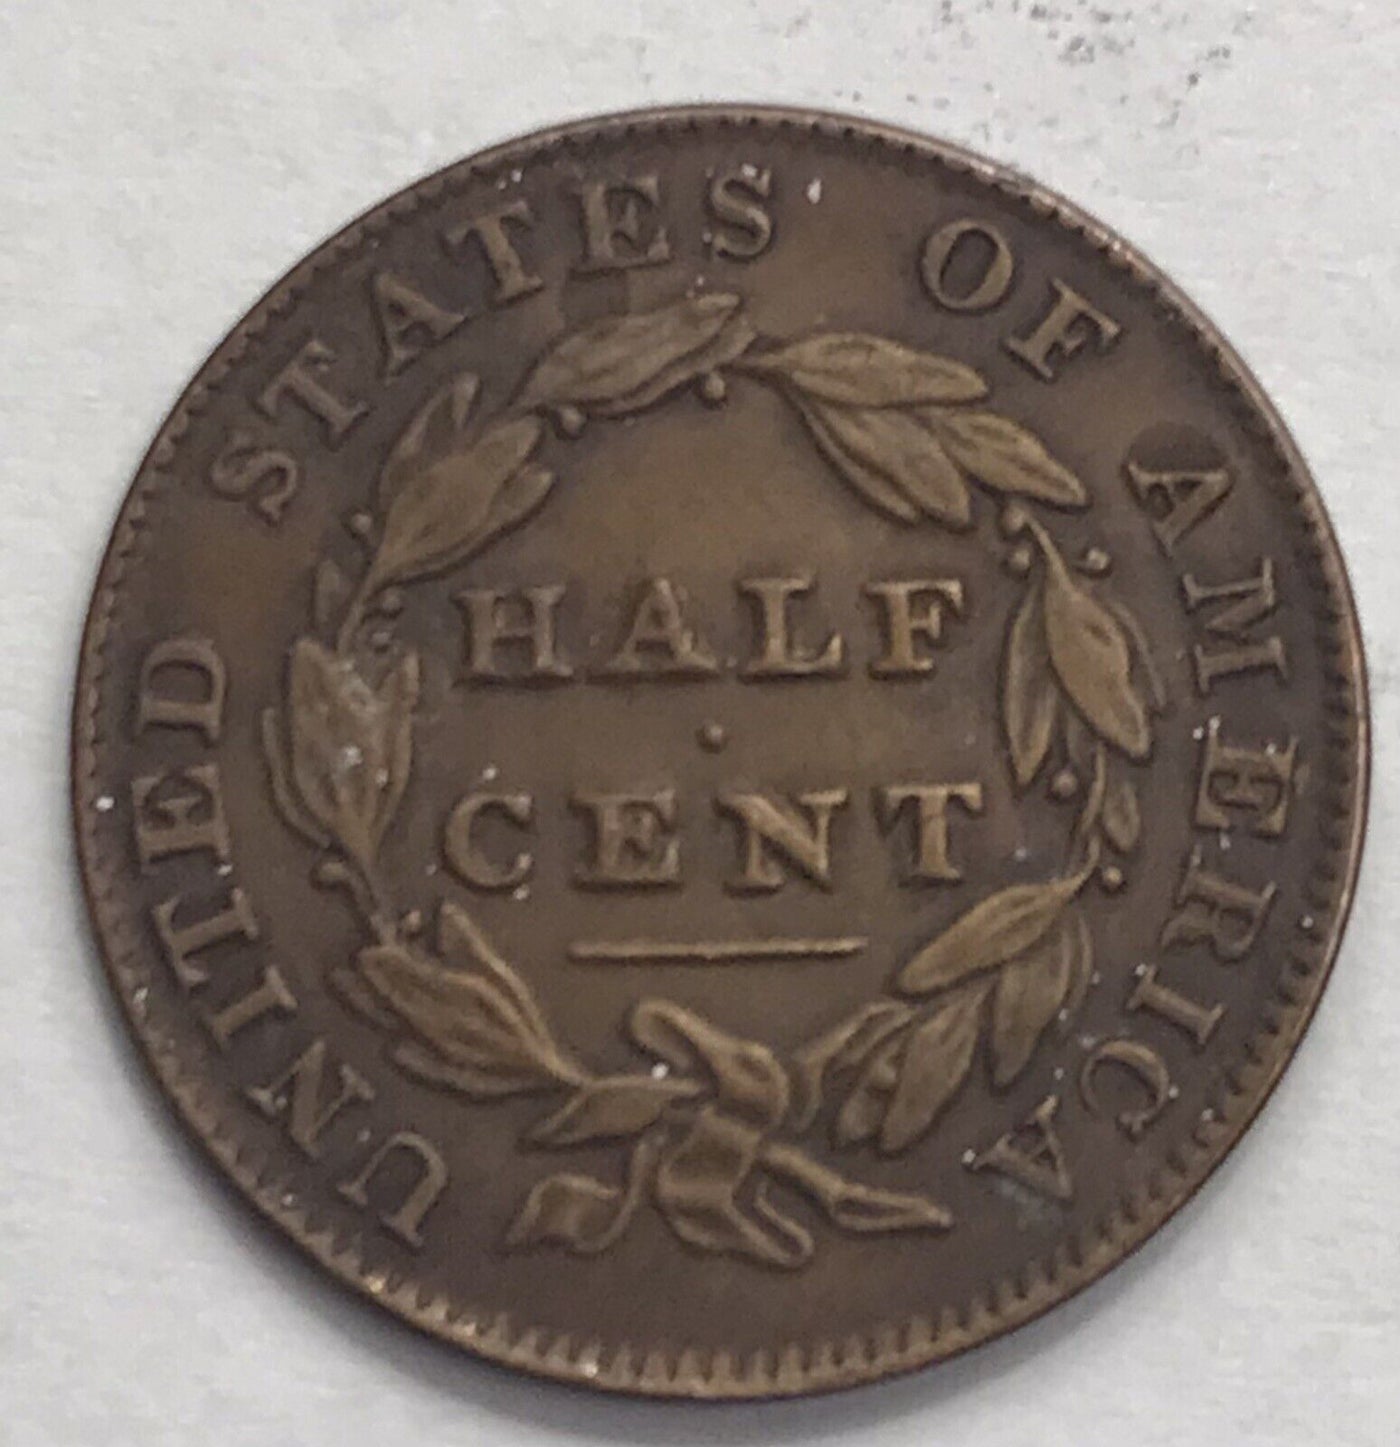 Half cent Extra Fine 1826 classic head coin value flanked by stars